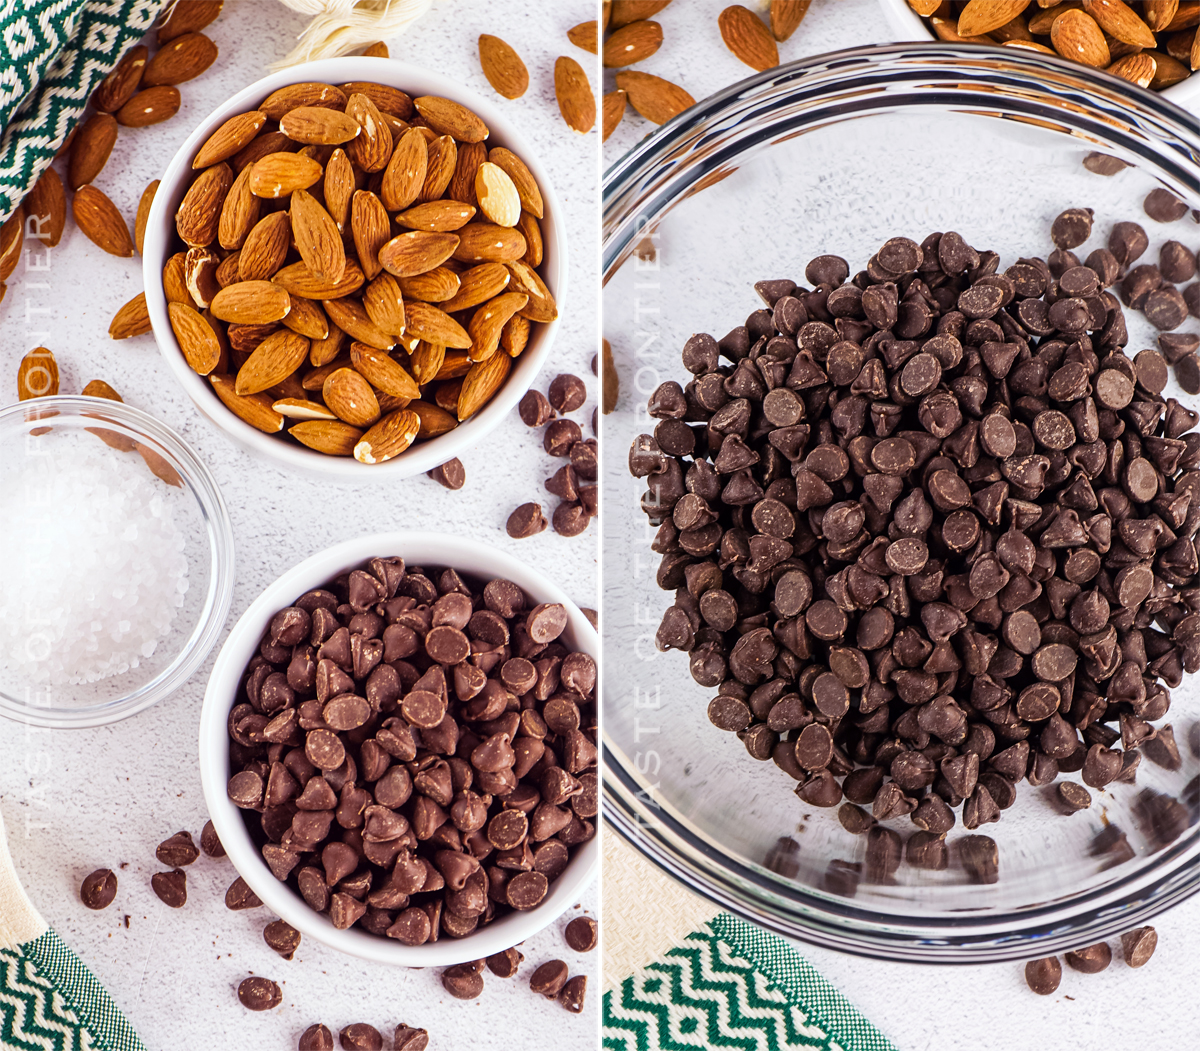 Ingredients for Chocolate Nut Clusters